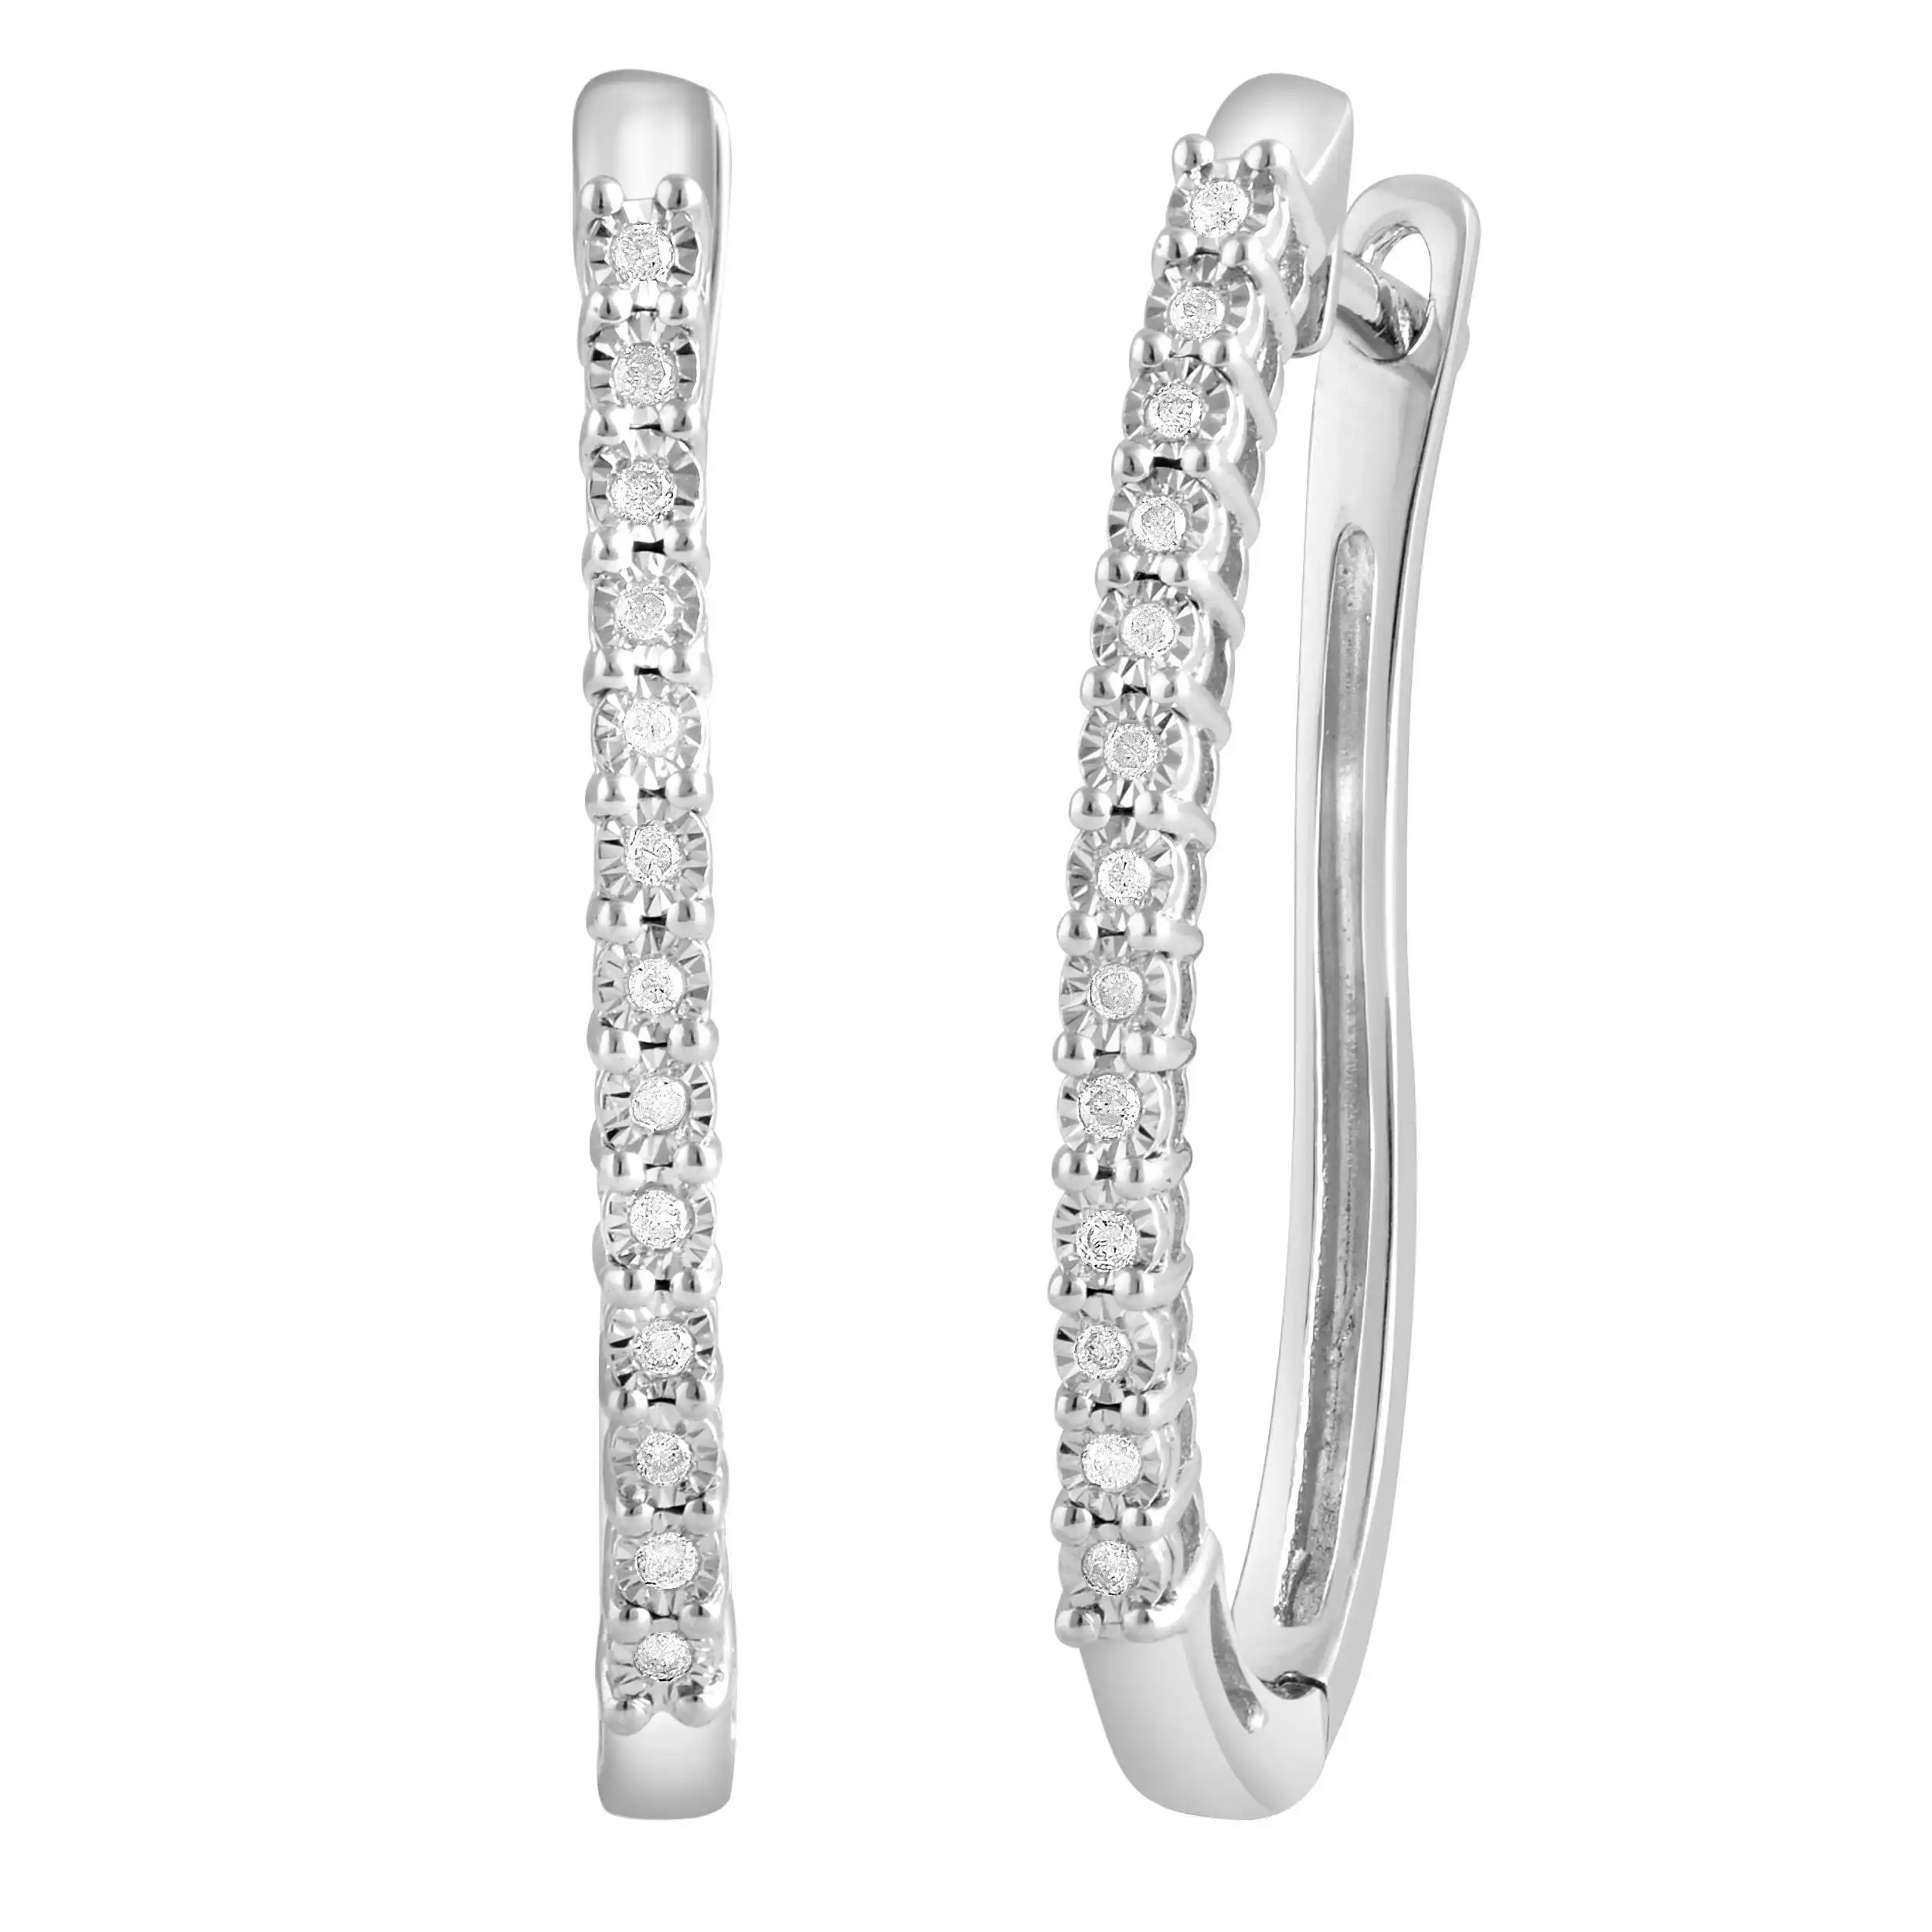 Miracle Halo Hoop Earrings with 0.10ct Diamonds in Sterling Silver